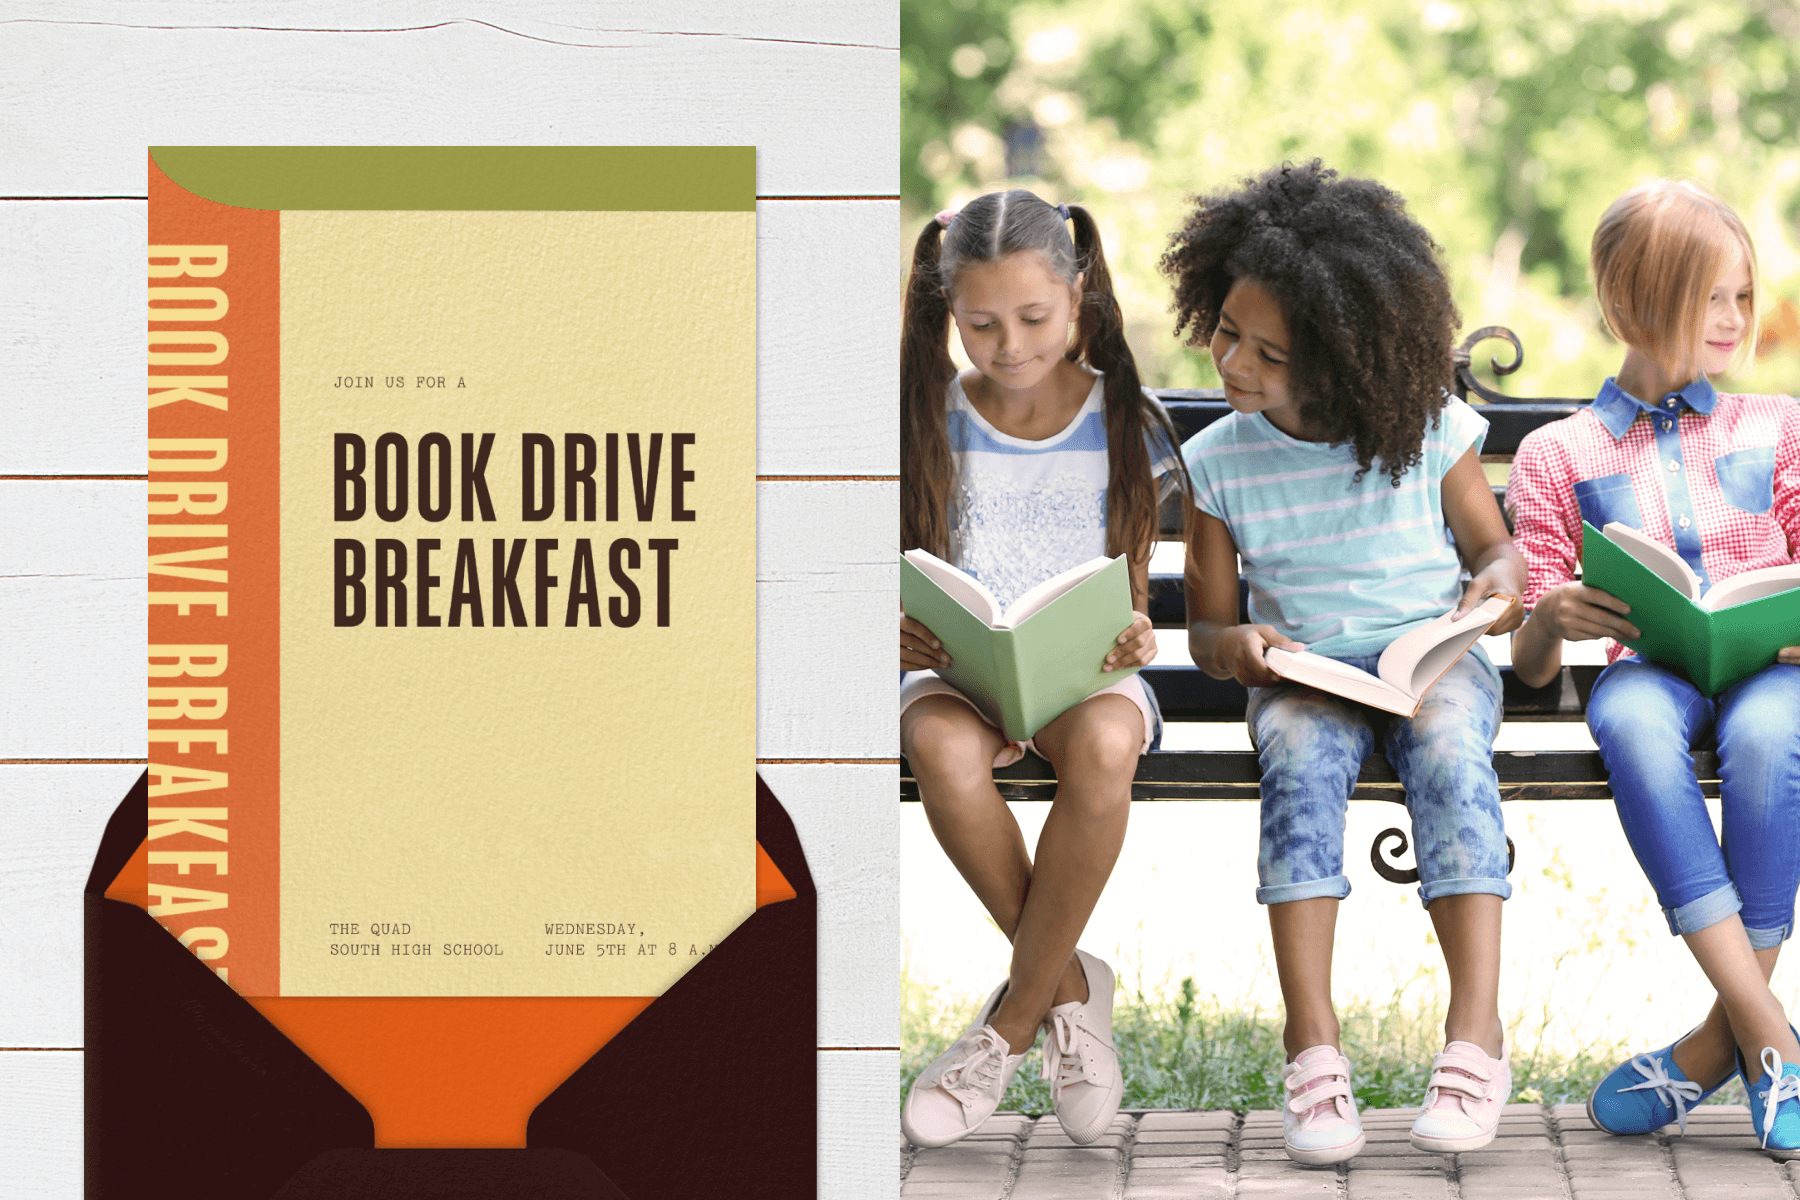 Left: An invitation for a book drive breakfast resembles a hardcover book with an orange spine and green pages. Right: Three young girls read books on a bench while one looks over at another’s book.